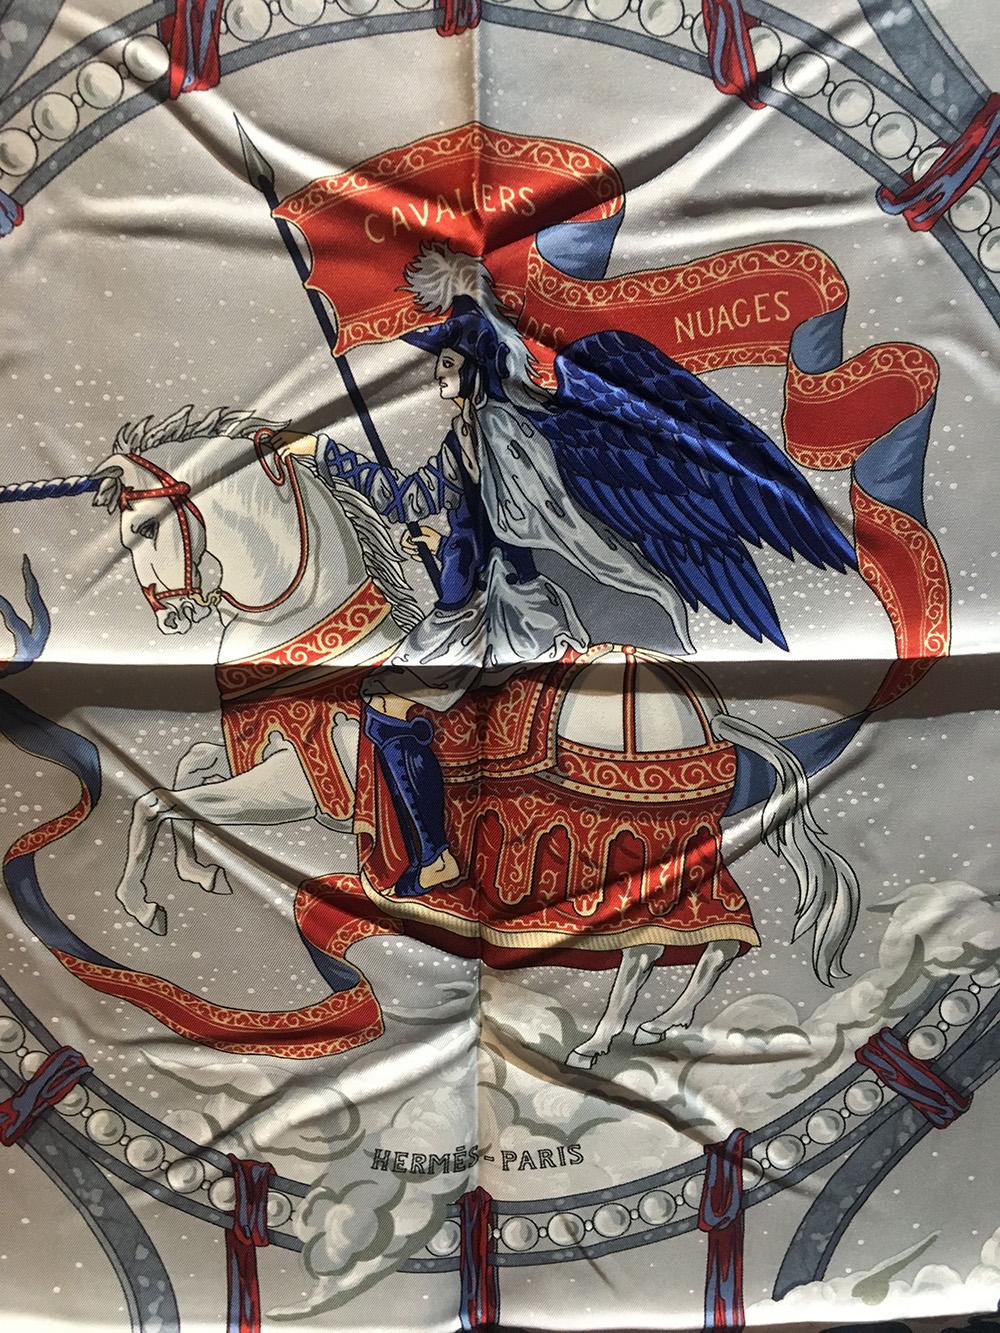 Authentic Hermes Cavaliers des Nuages silk scarf in gray in excellent condition. Original silk screen design c1999 by Jean-Christophe Donnadieu depicts a wonderful mythological story over a gray background set in the stars. 100% silk, hand rolled